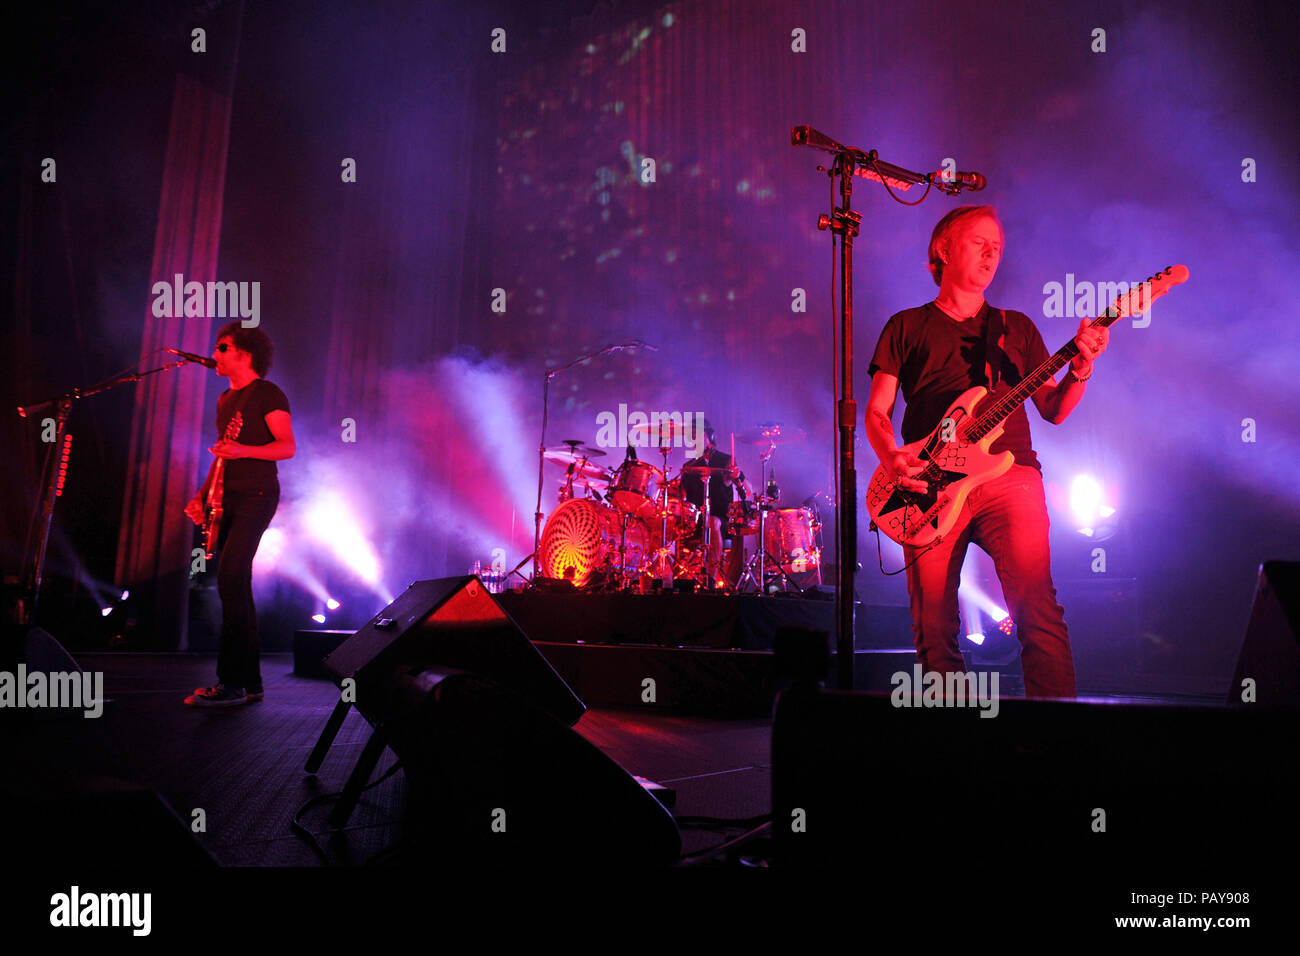 HOLLYWOOD FL - August 11: Jerry Cantrell of Alice In Chains performs at Hard Rock Live held at the Seminole Hard Rock Hotel & Casino on August 11, 2015 in Hollywood, Florida  People:  Sean Kinney, William DuVall, Jerry Cantrell Stock Photo